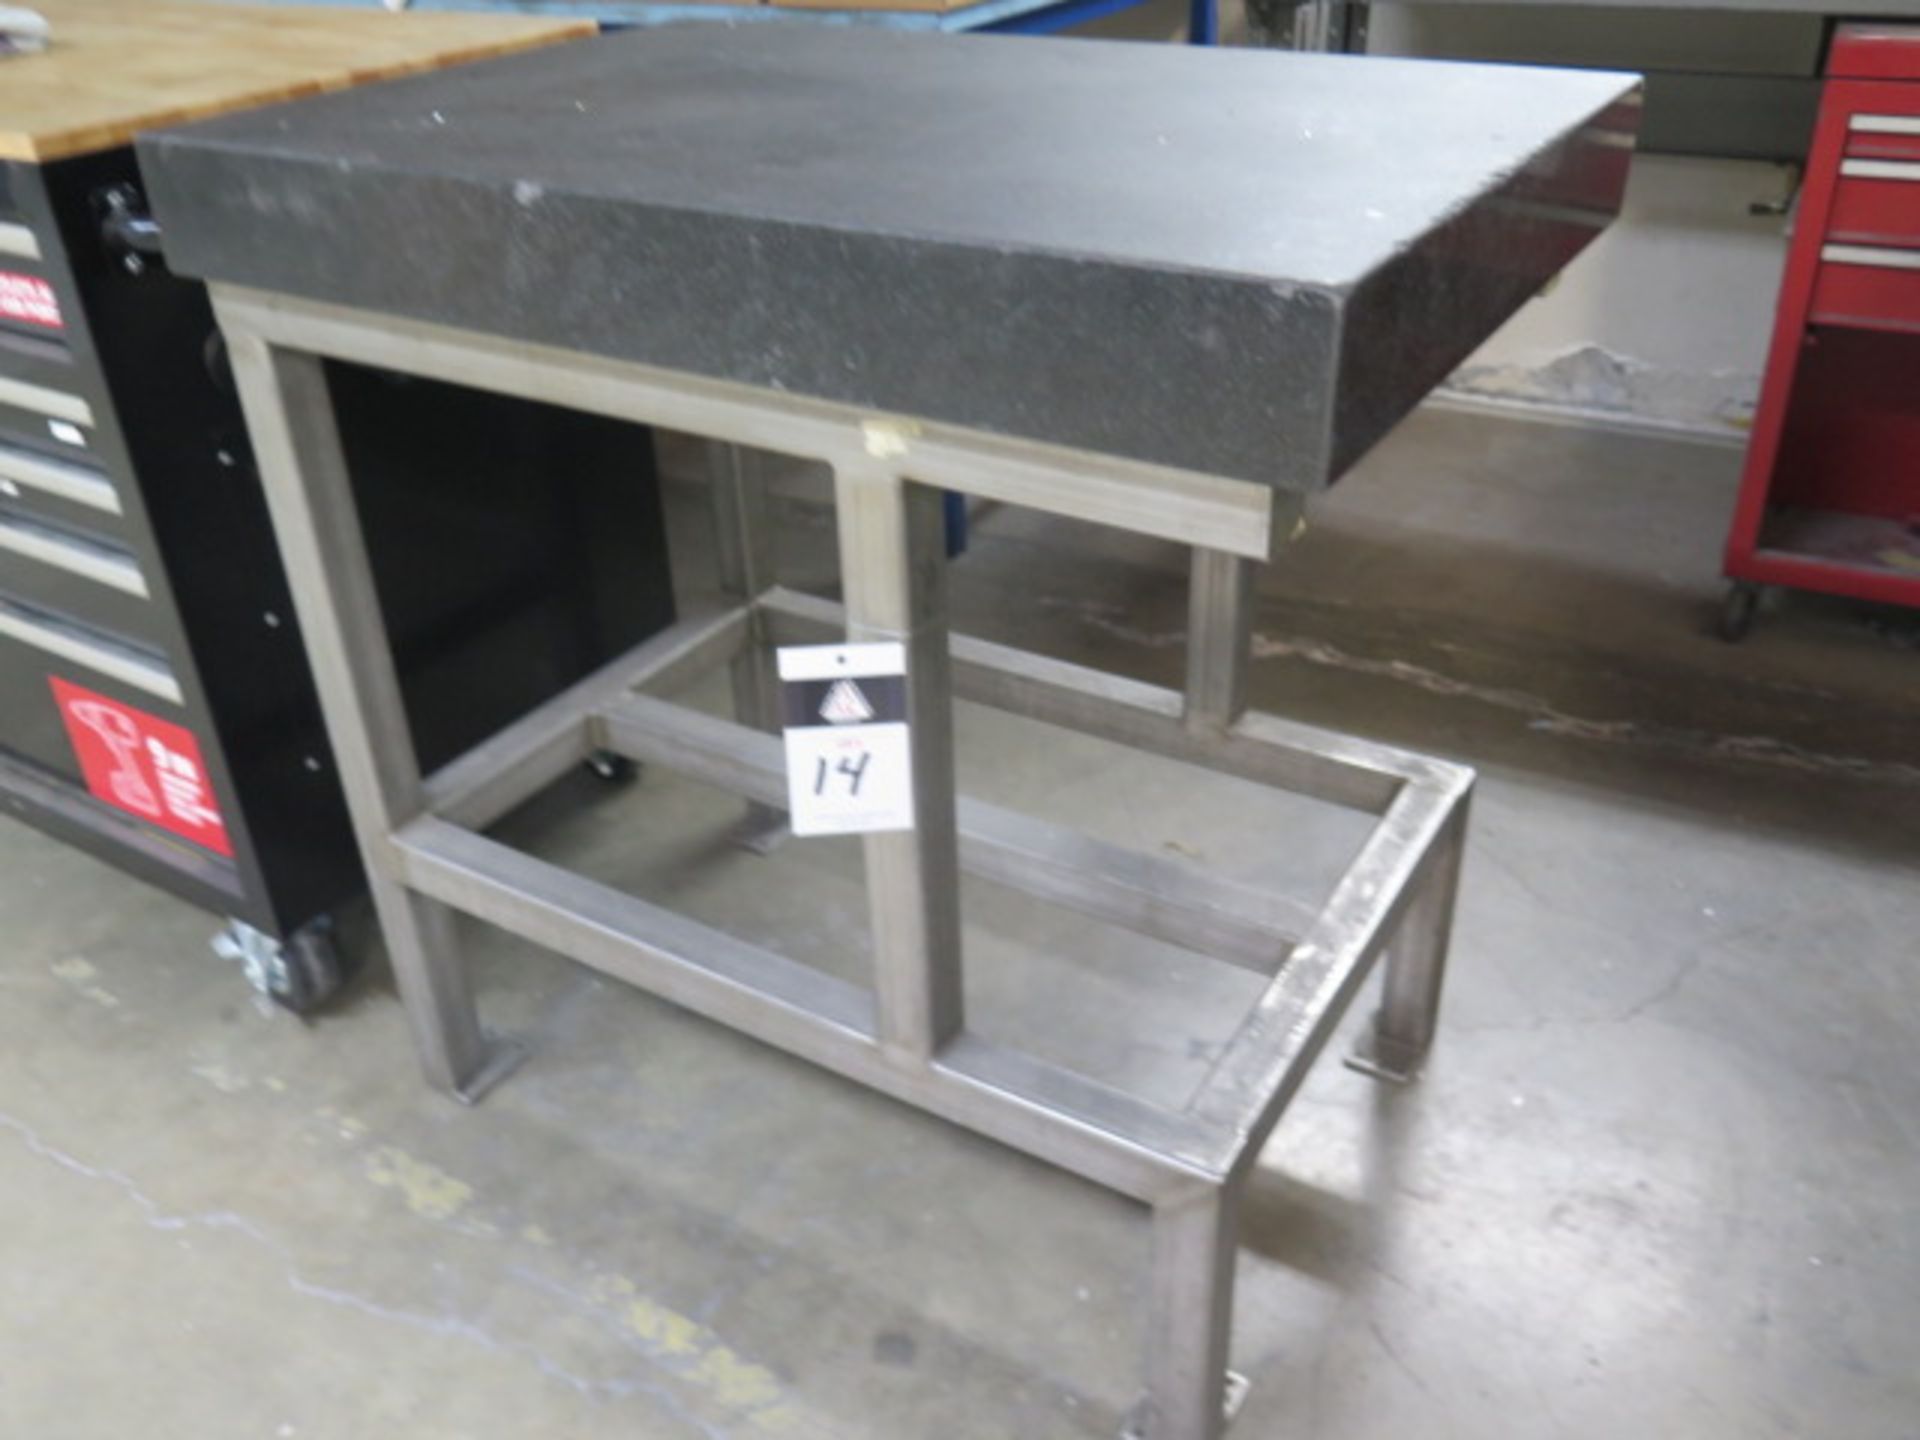 24” x 35” x 4” Granite Surface Plate w/ Stand (SOLD AS-IS - NO WARRANTY) - Image 2 of 4